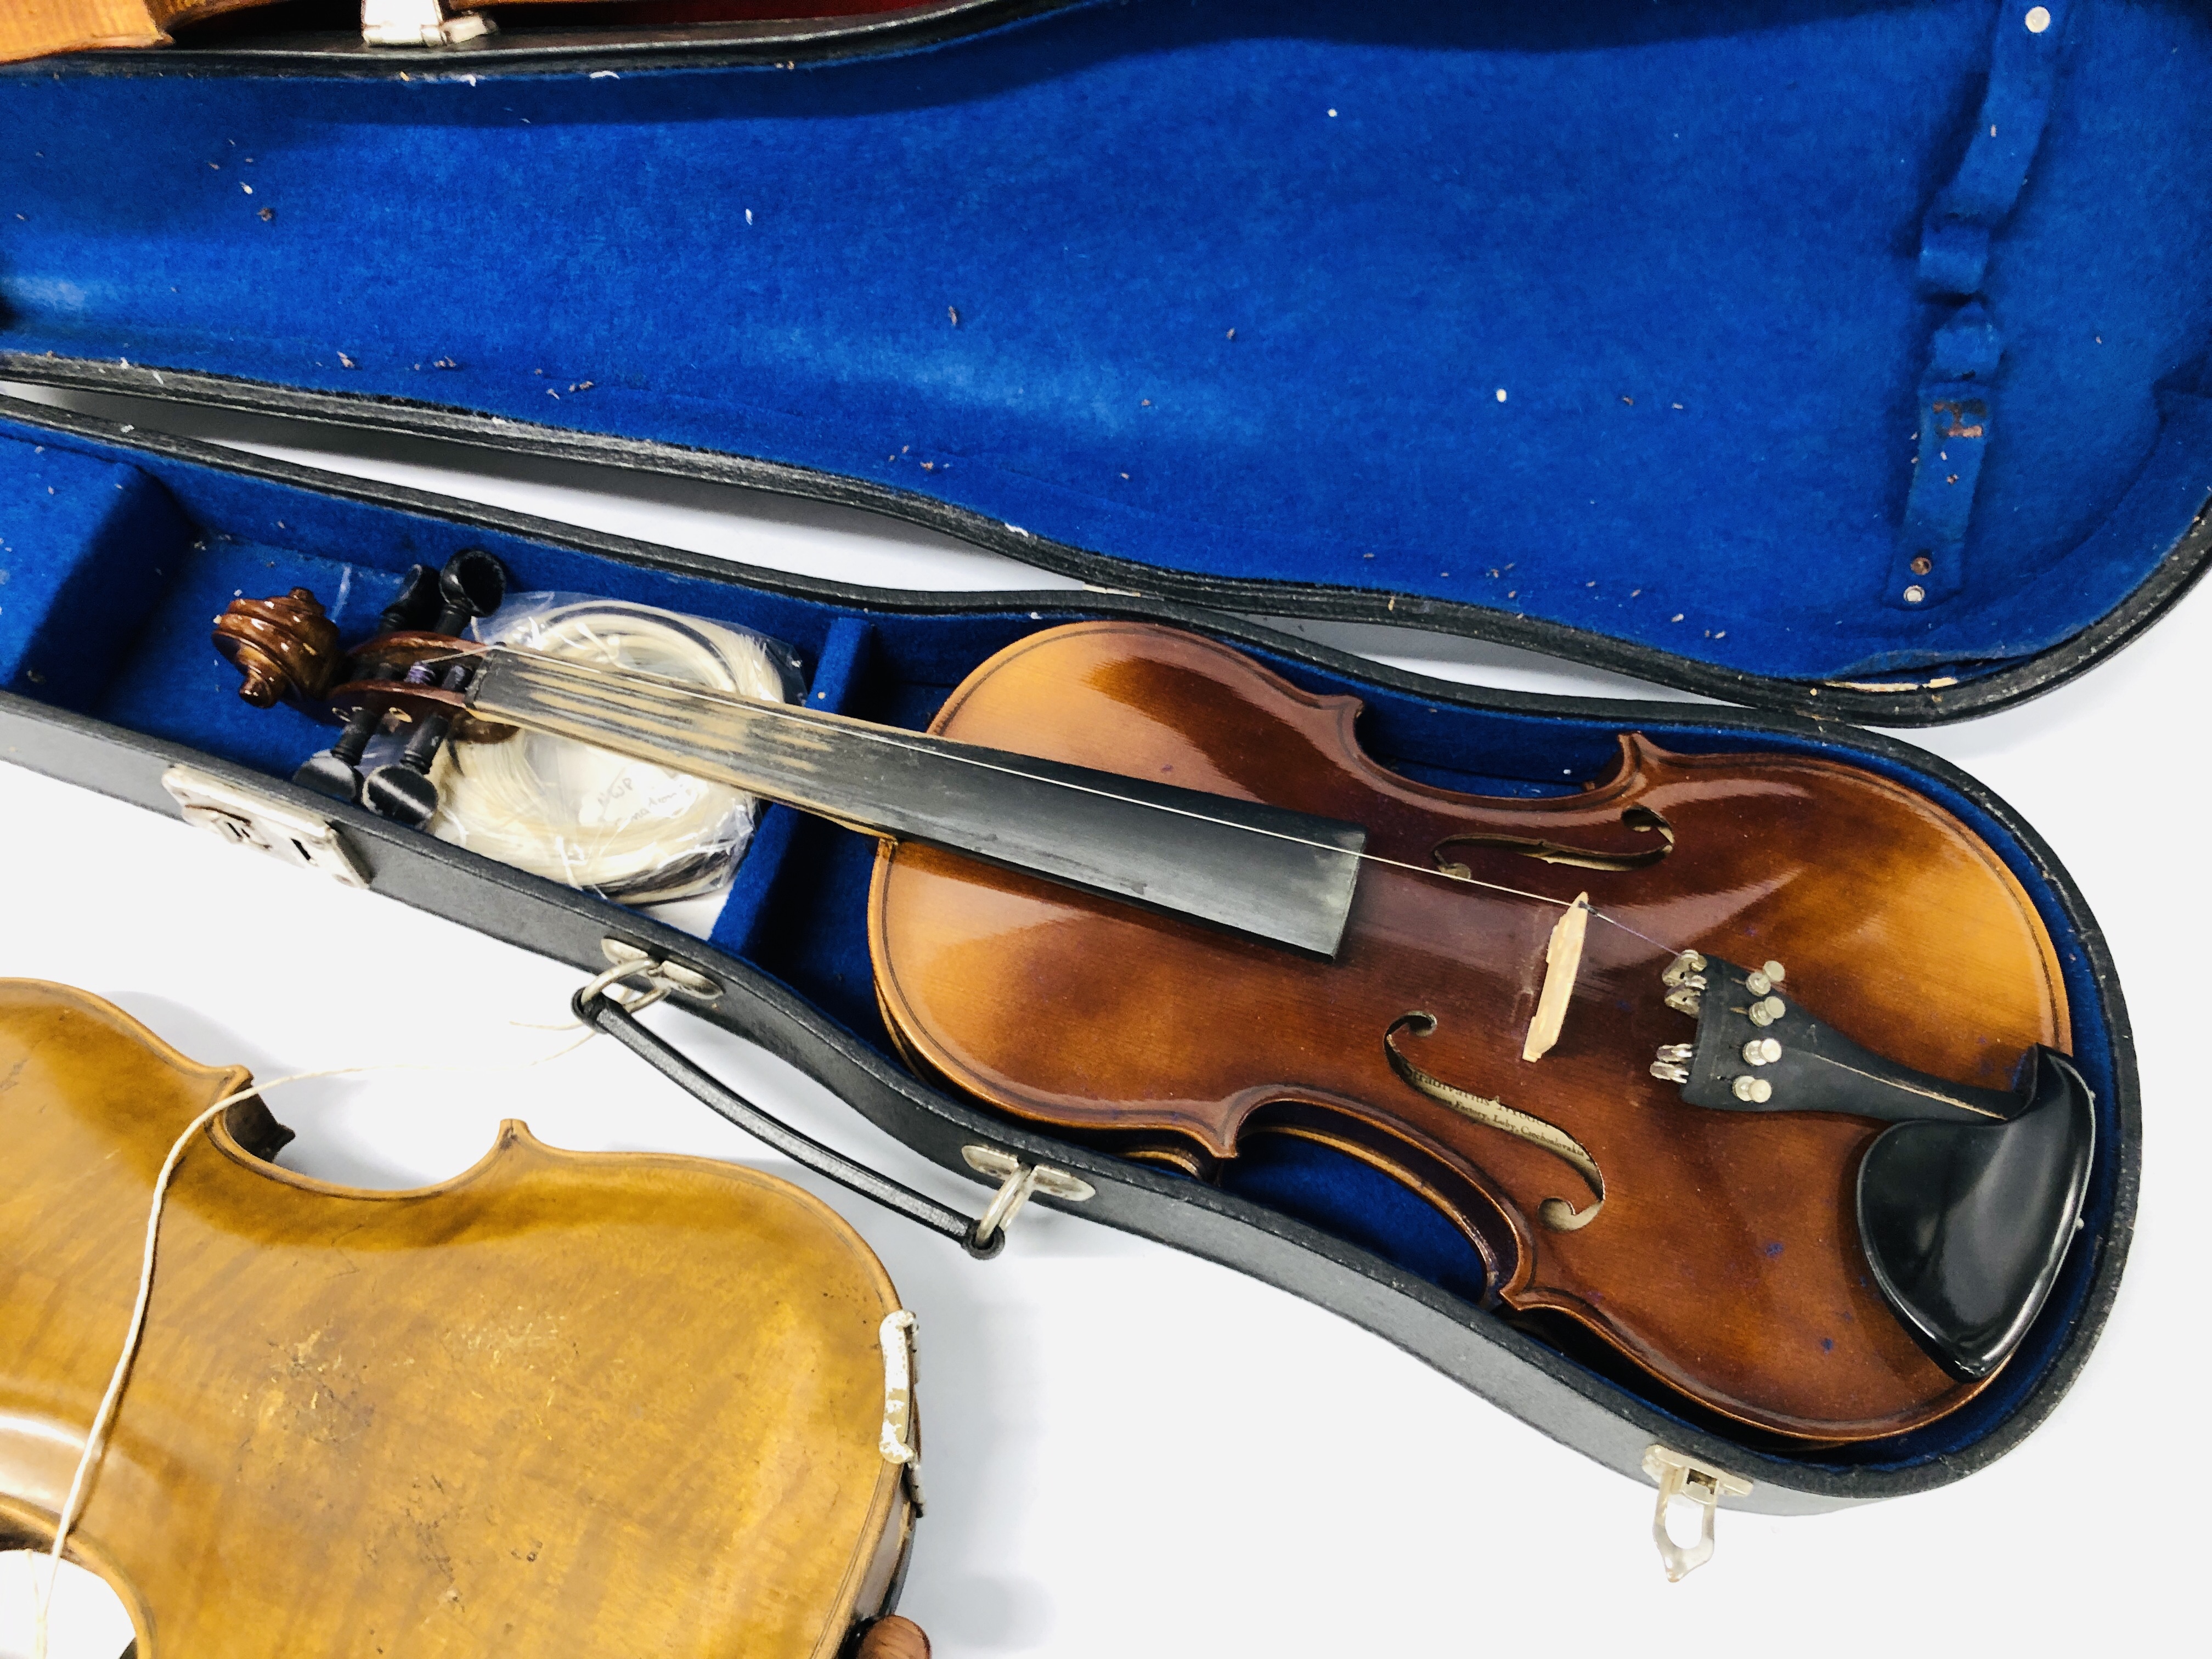 4 X VINTAGE VIOLINS AND 2 WOODEN CASES, VARIOUS BOWS (NO STRINGS) FOR RESTORATION. - Image 7 of 20